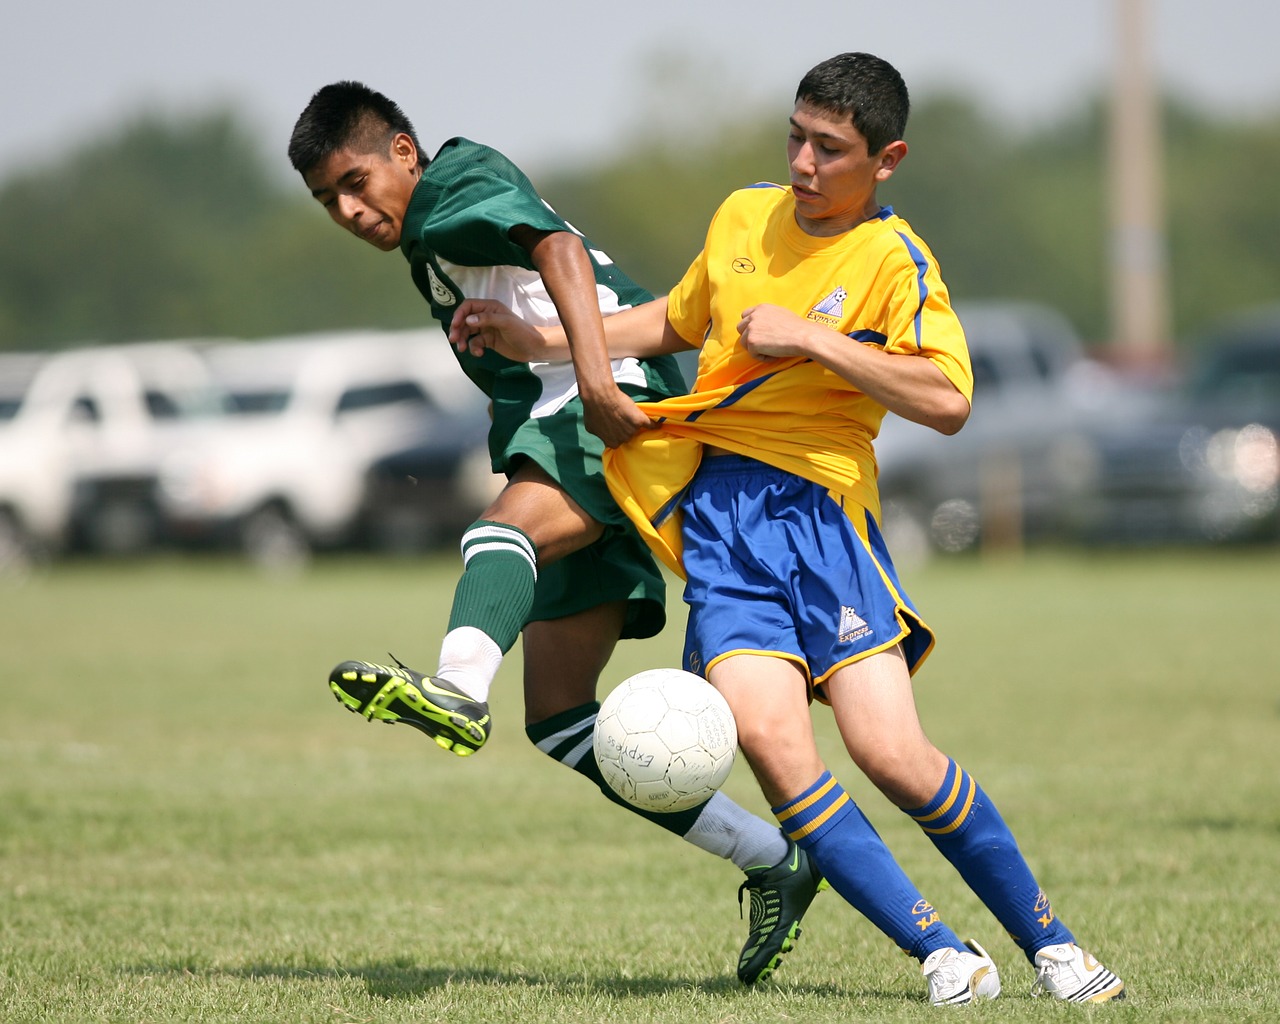 soccer football action free photo